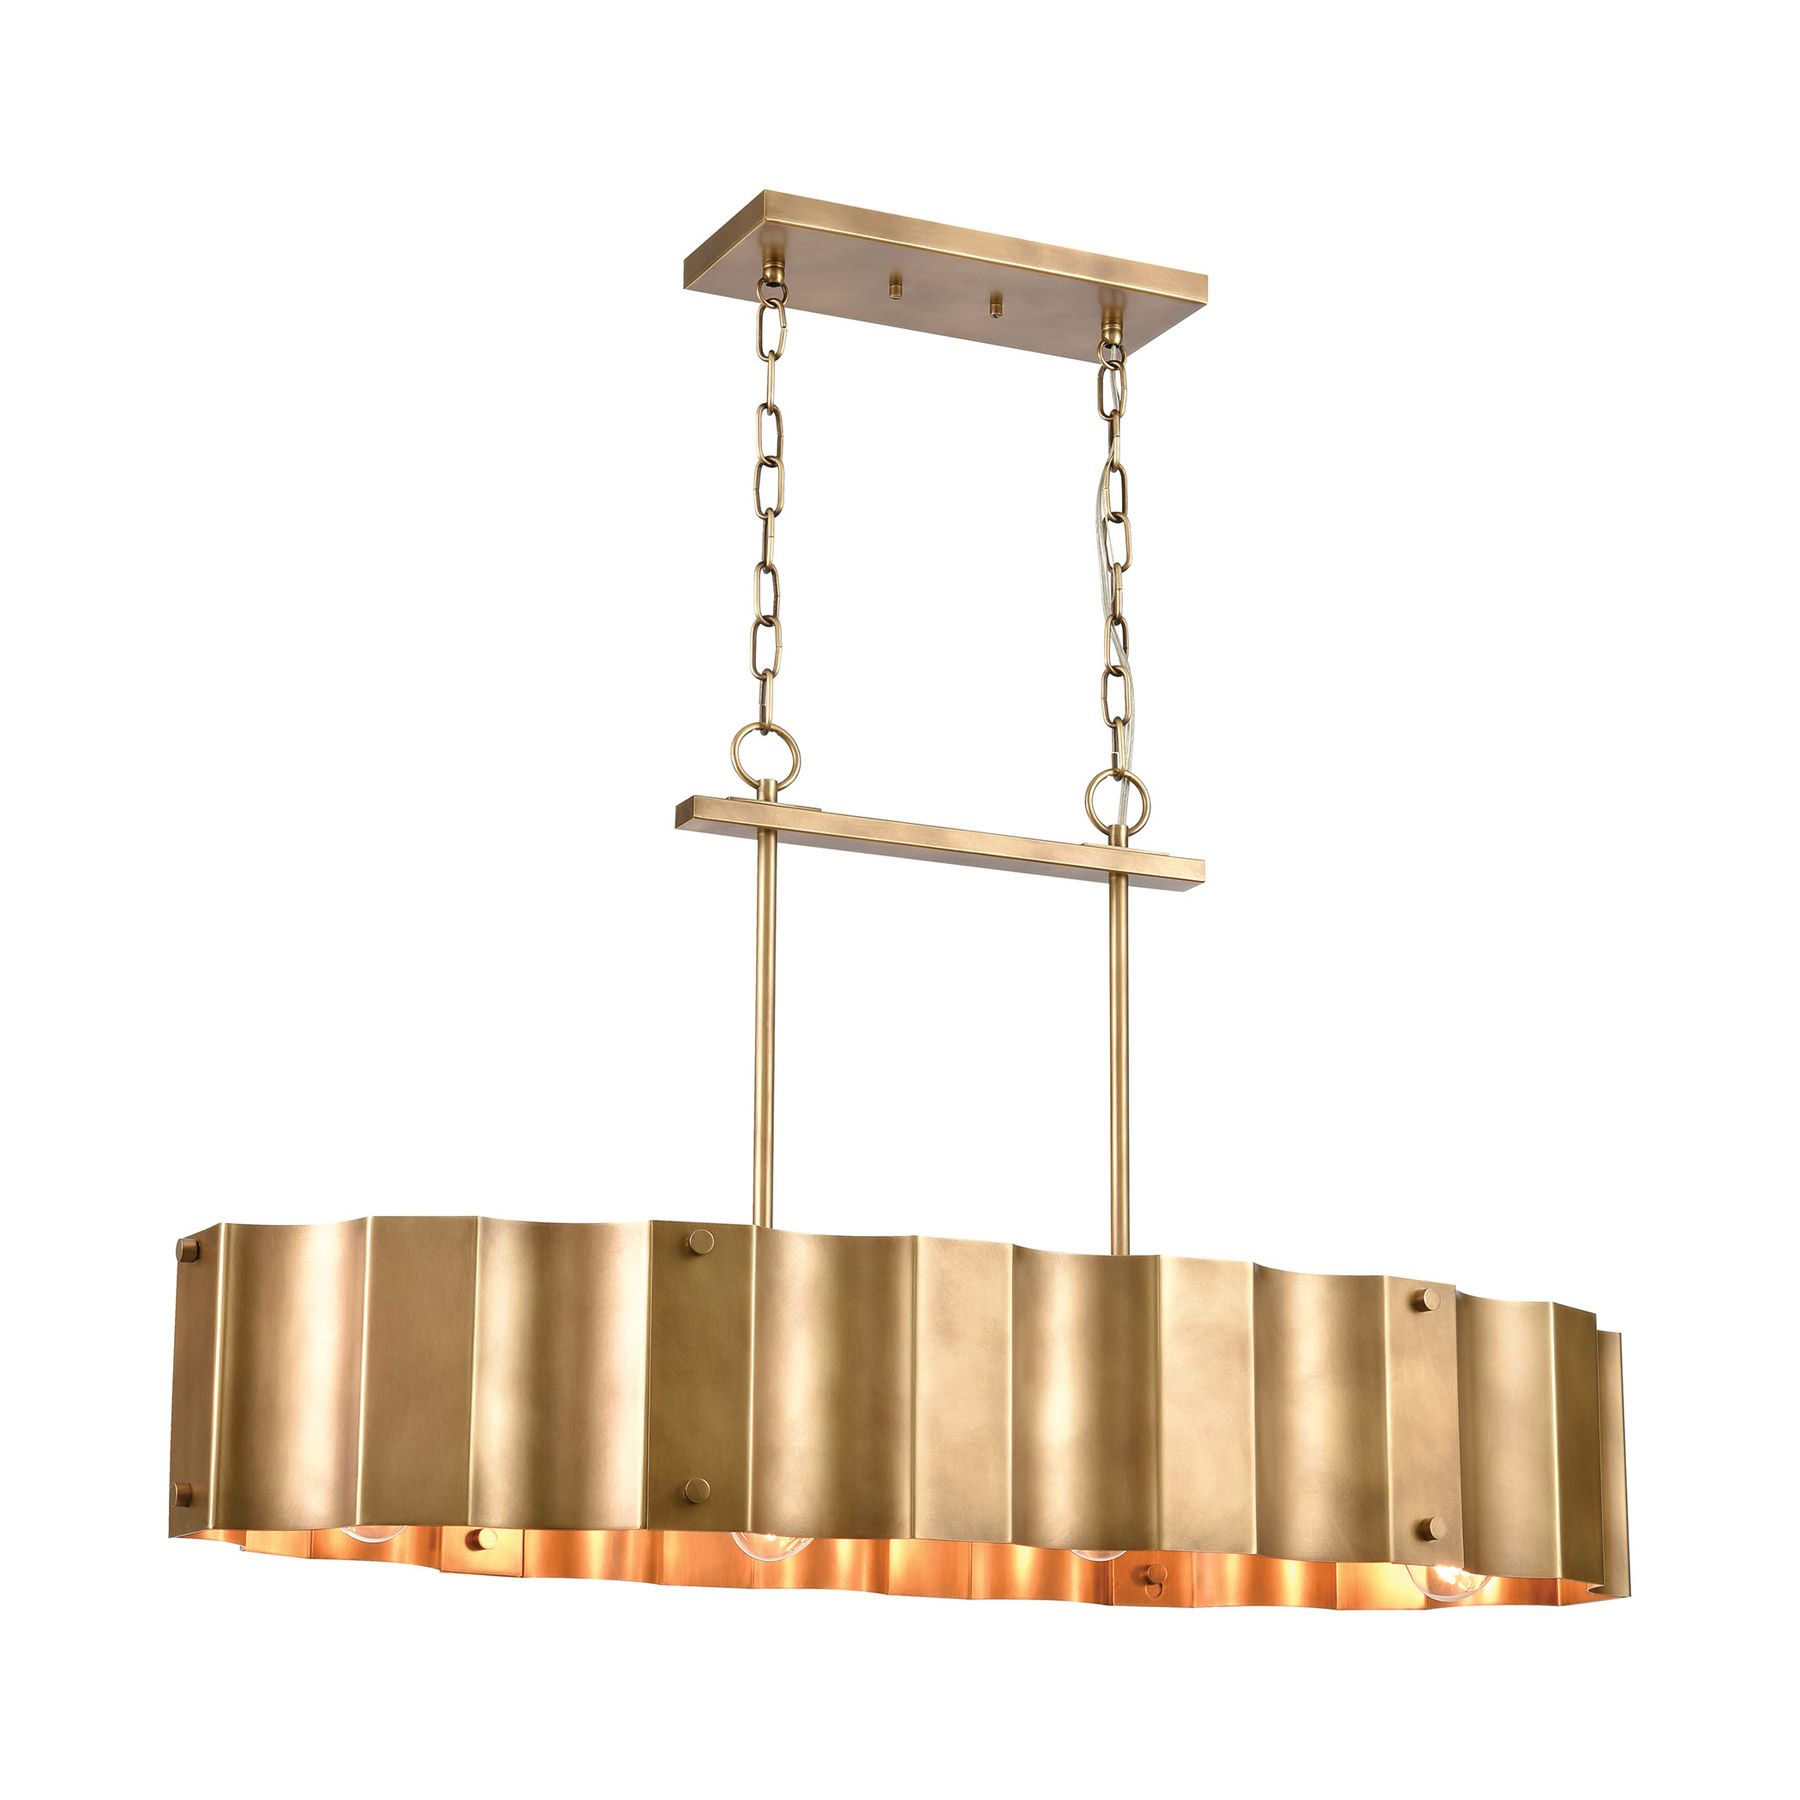 Natural Brass 19 Inch Eight Light Chandeliers With Regard To Most Current Elk Lighting 89068/4 4 Light Island Light In Natural Brass (View 18 of 20)